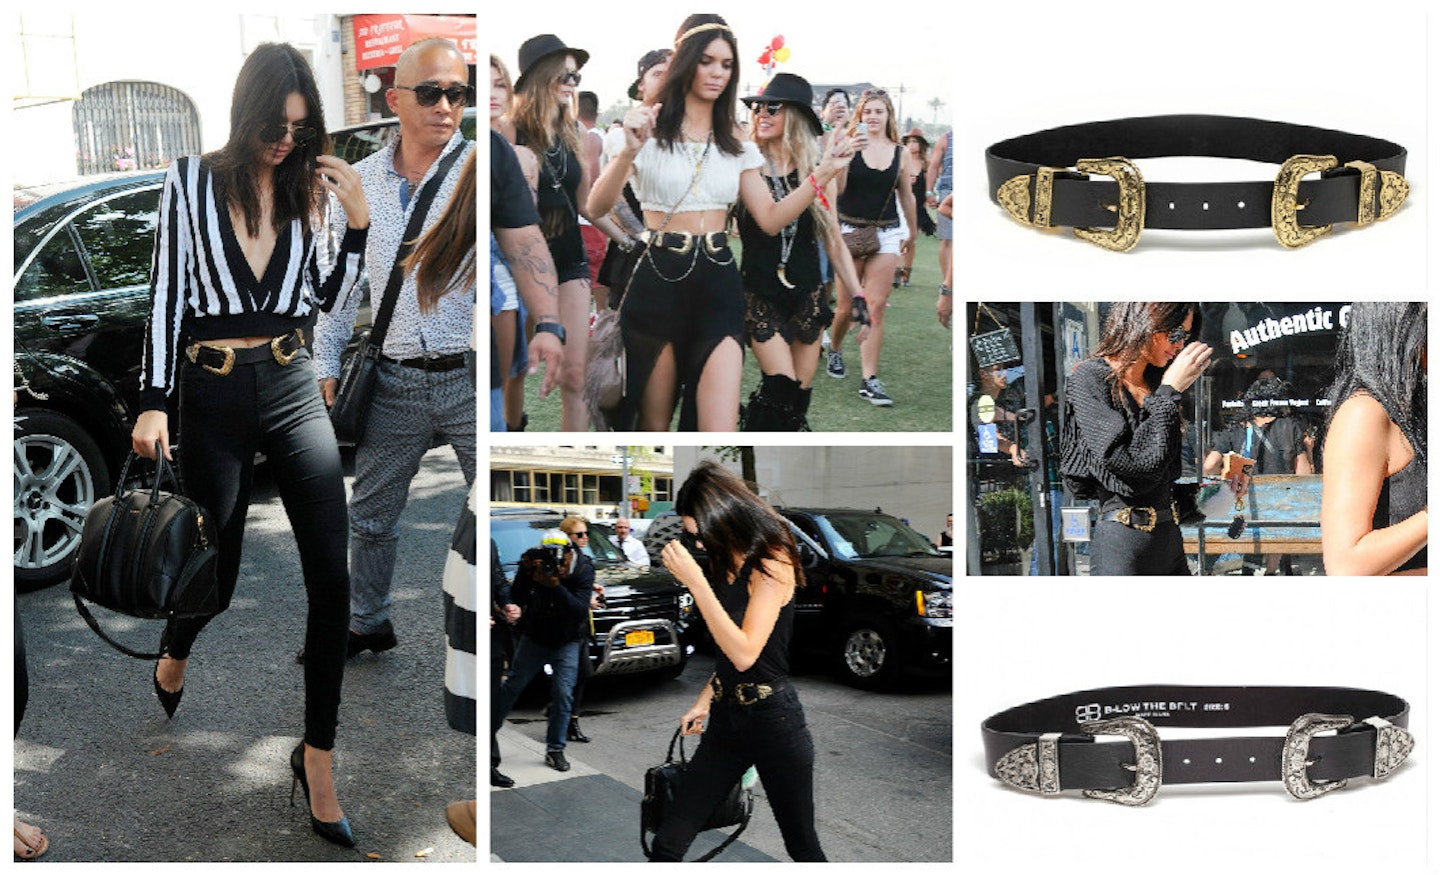 The Coin Belt You Last Wore In 2004 Is Back - Whether You Like It